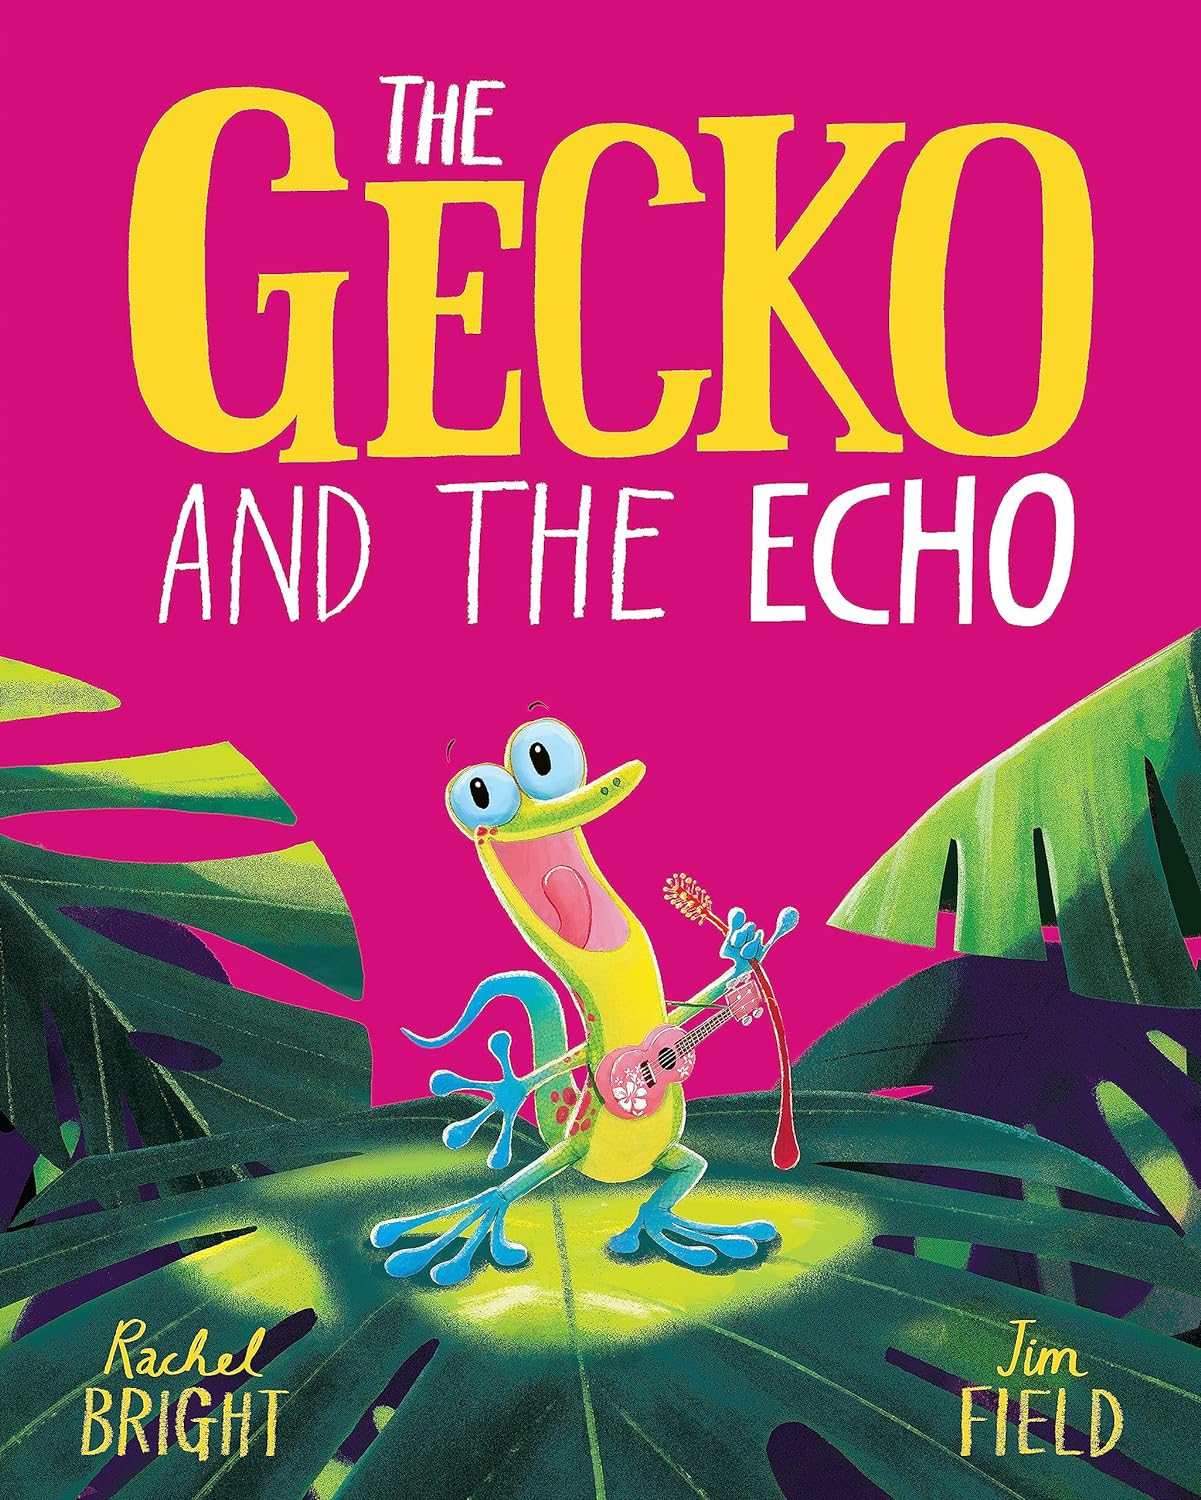 Front cover of The Gecko and the Echo by Rachel Bright (illustrated by Jim Field)